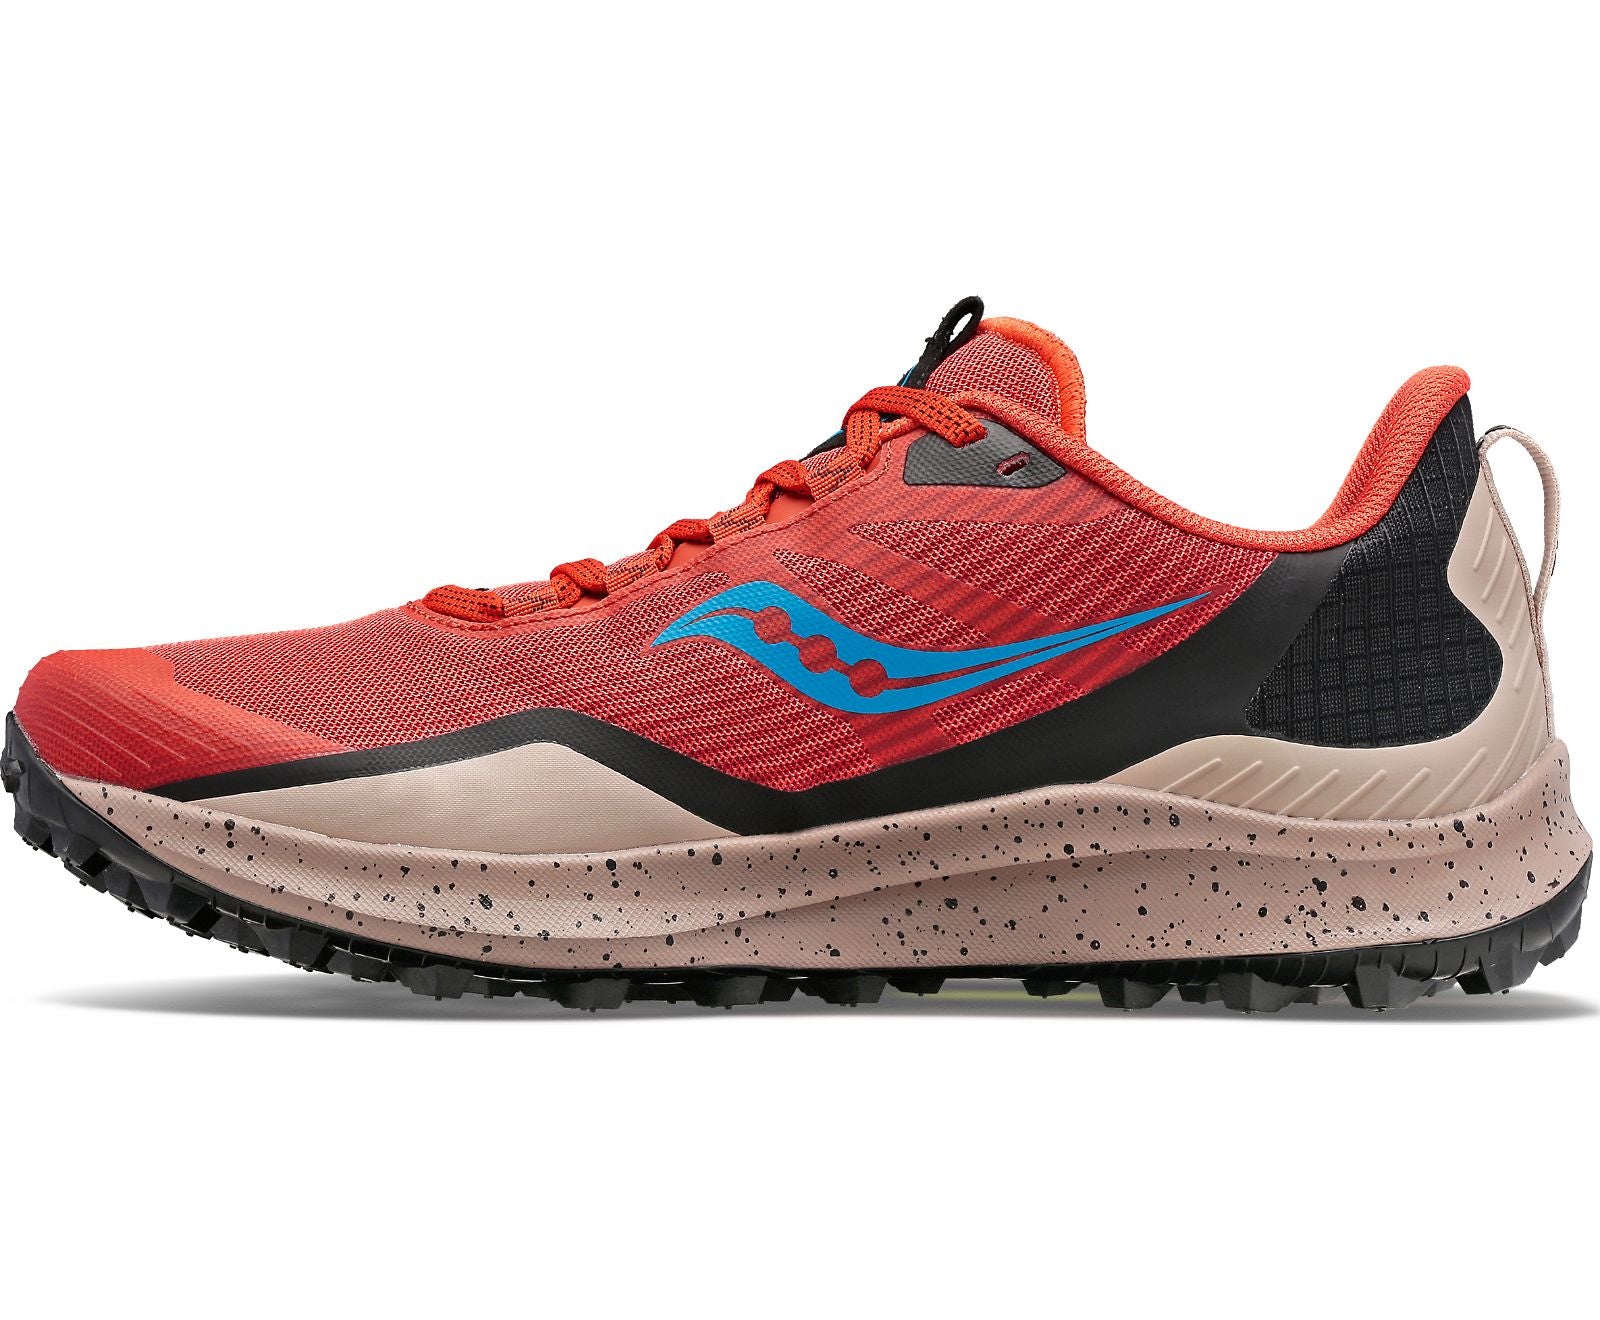 Medial view of the Men's Peregrine 12 trail shoe by Saucony in the color Clay/Loam